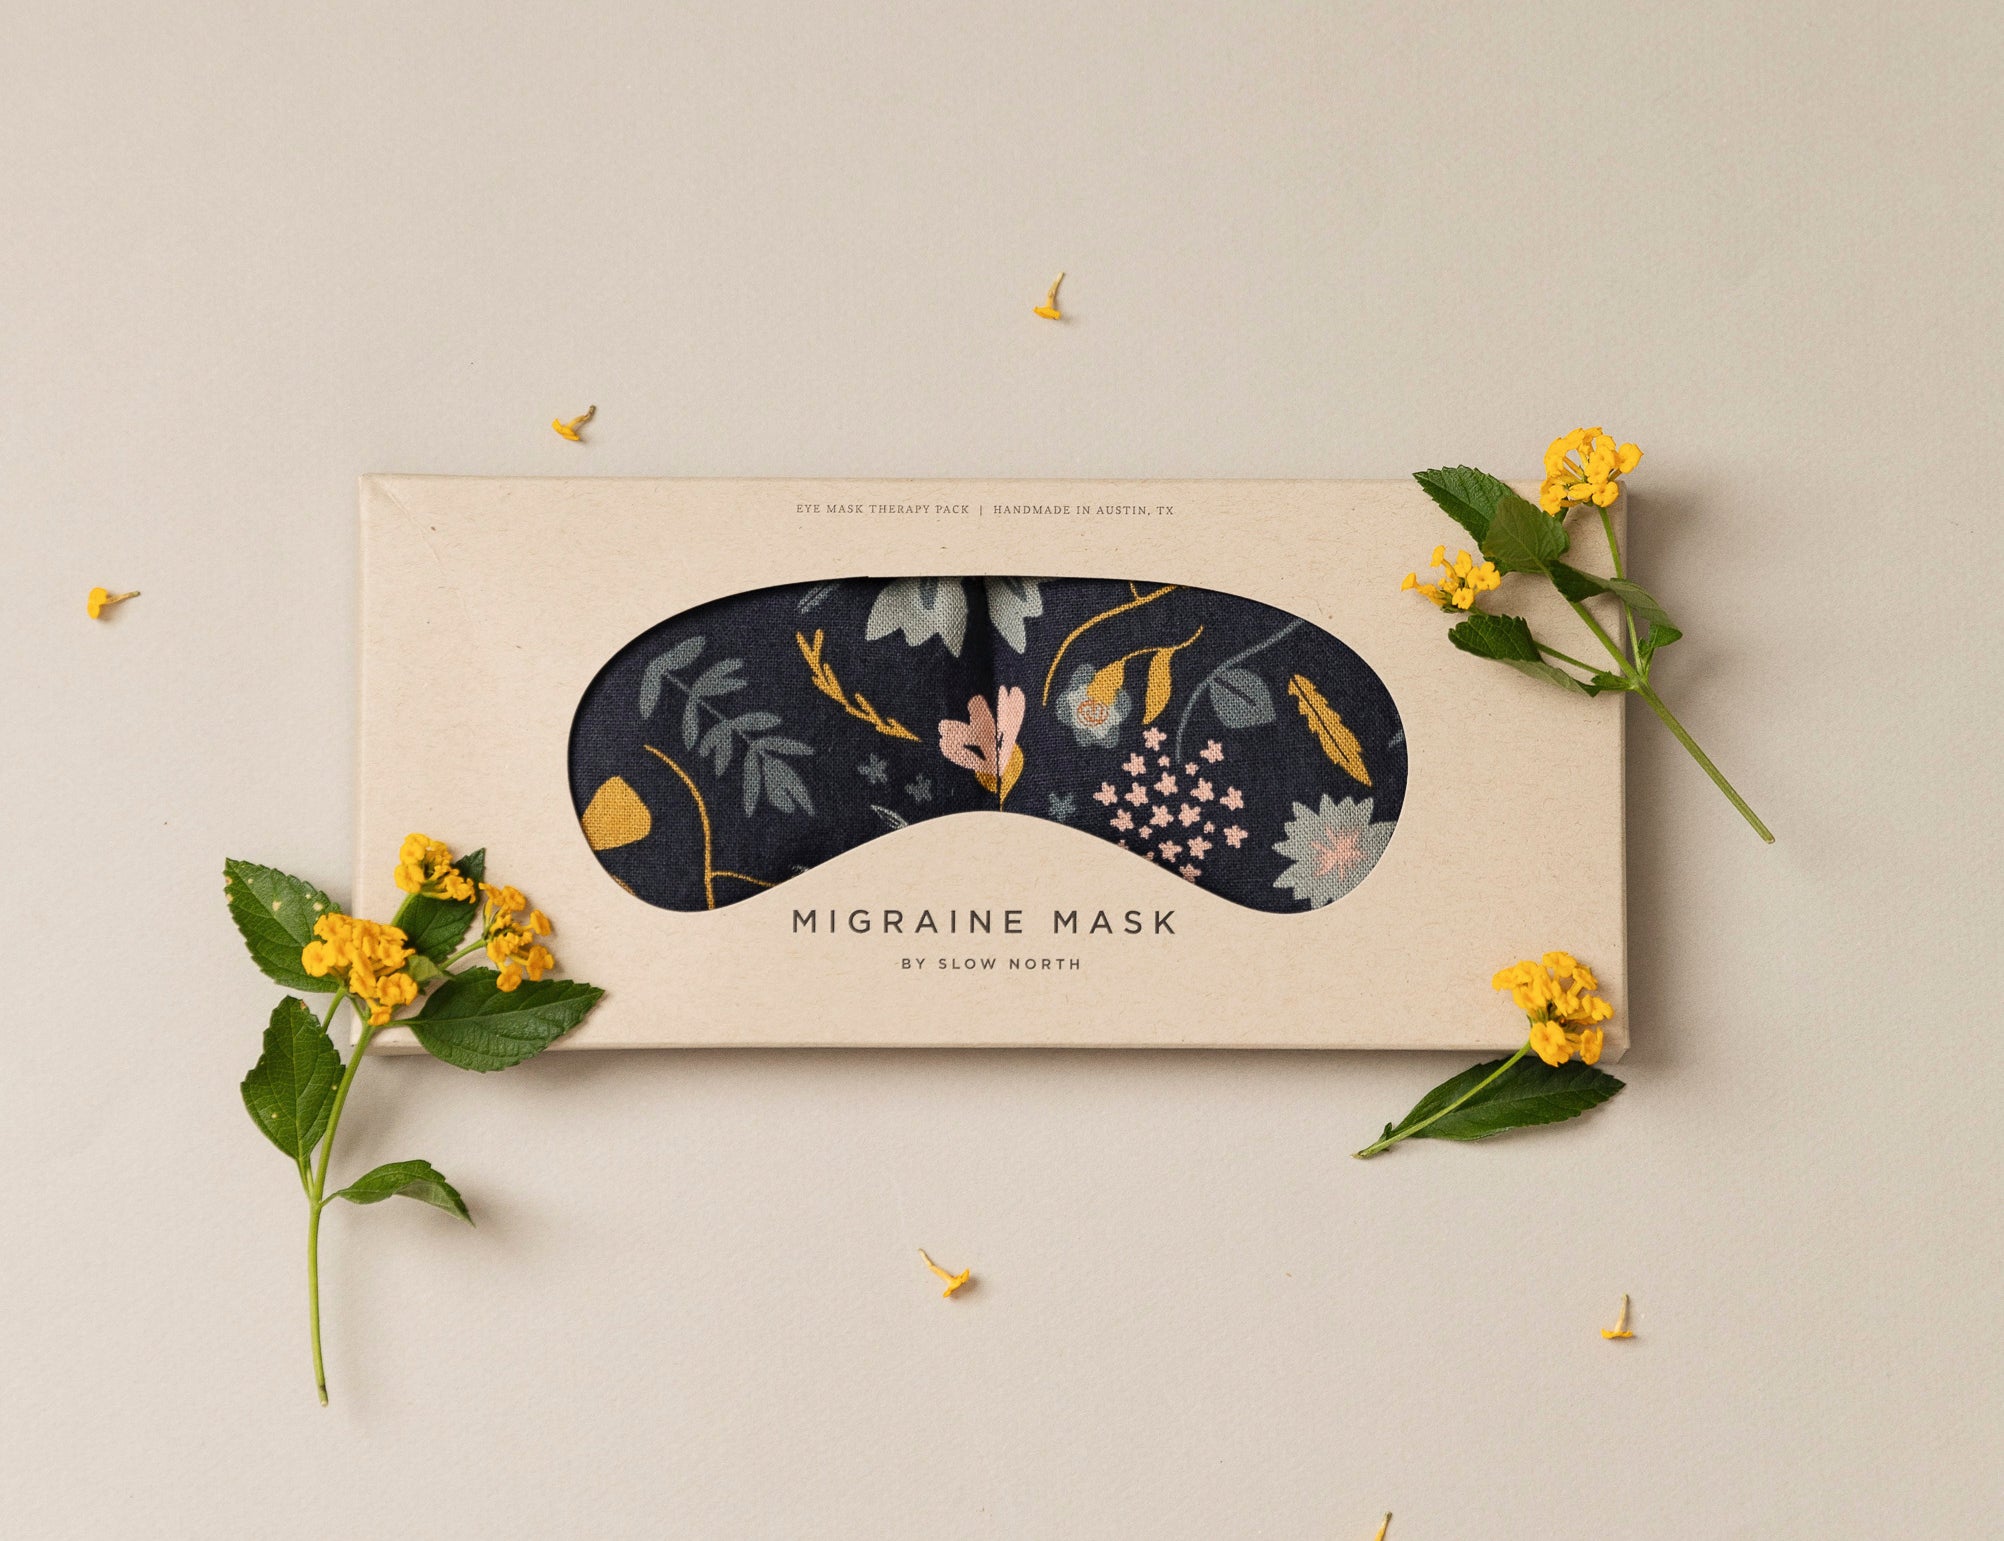 Migraine Mask by Slow North. Strap free cotton weighted eye pillow to be used hot or cold to sooth headaches and tired eyes. Navy and floral print. Inside box surrounded by yellow flowers. 